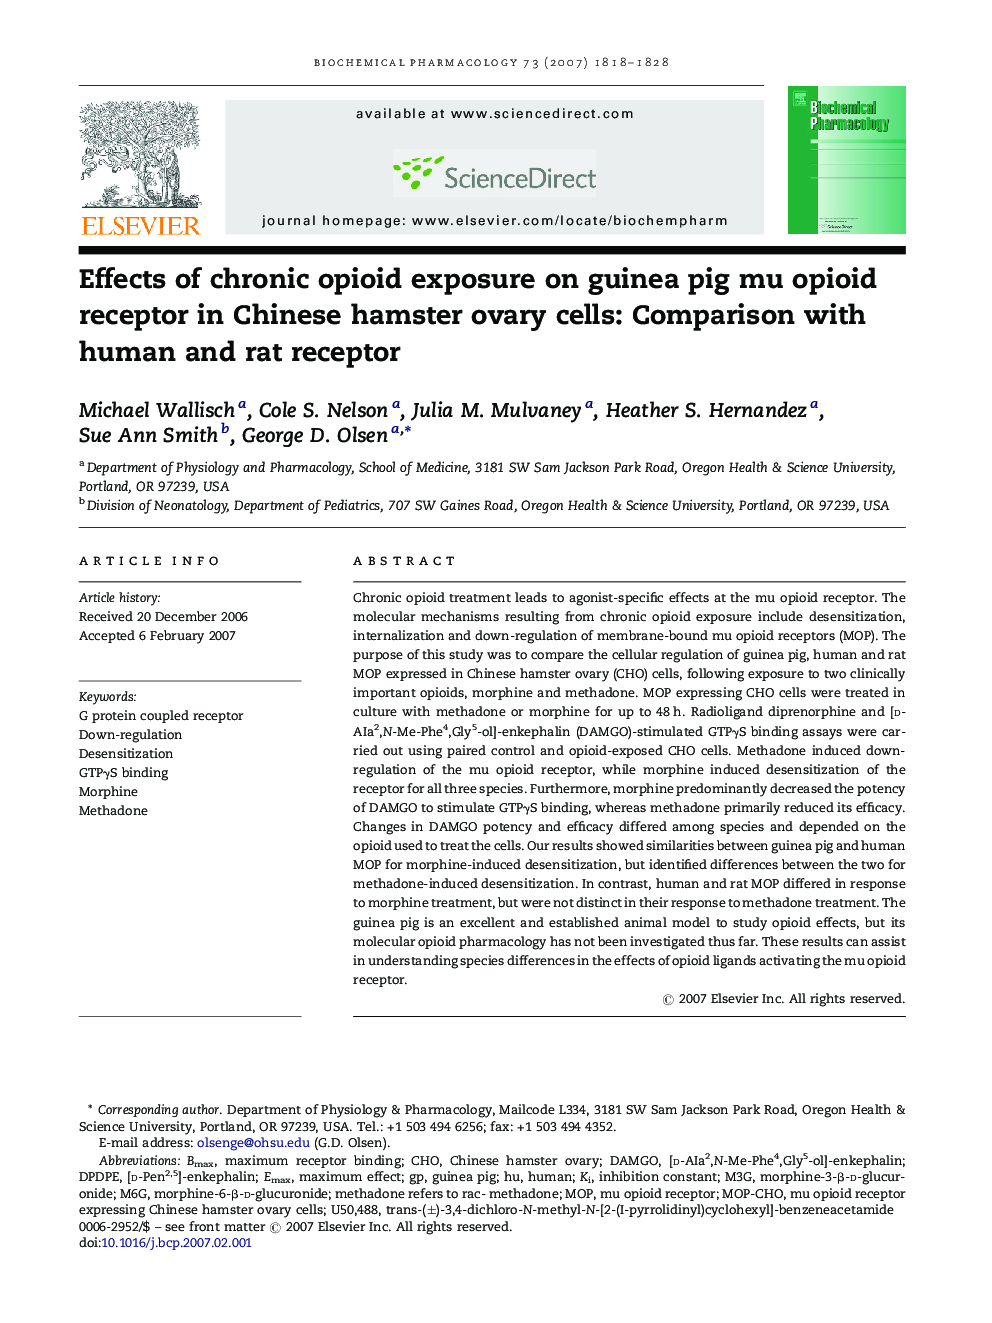 Effects of chronic opioid exposure on guinea pig mu opioid receptor in Chinese hamster ovary cells: Comparison with human and rat receptor